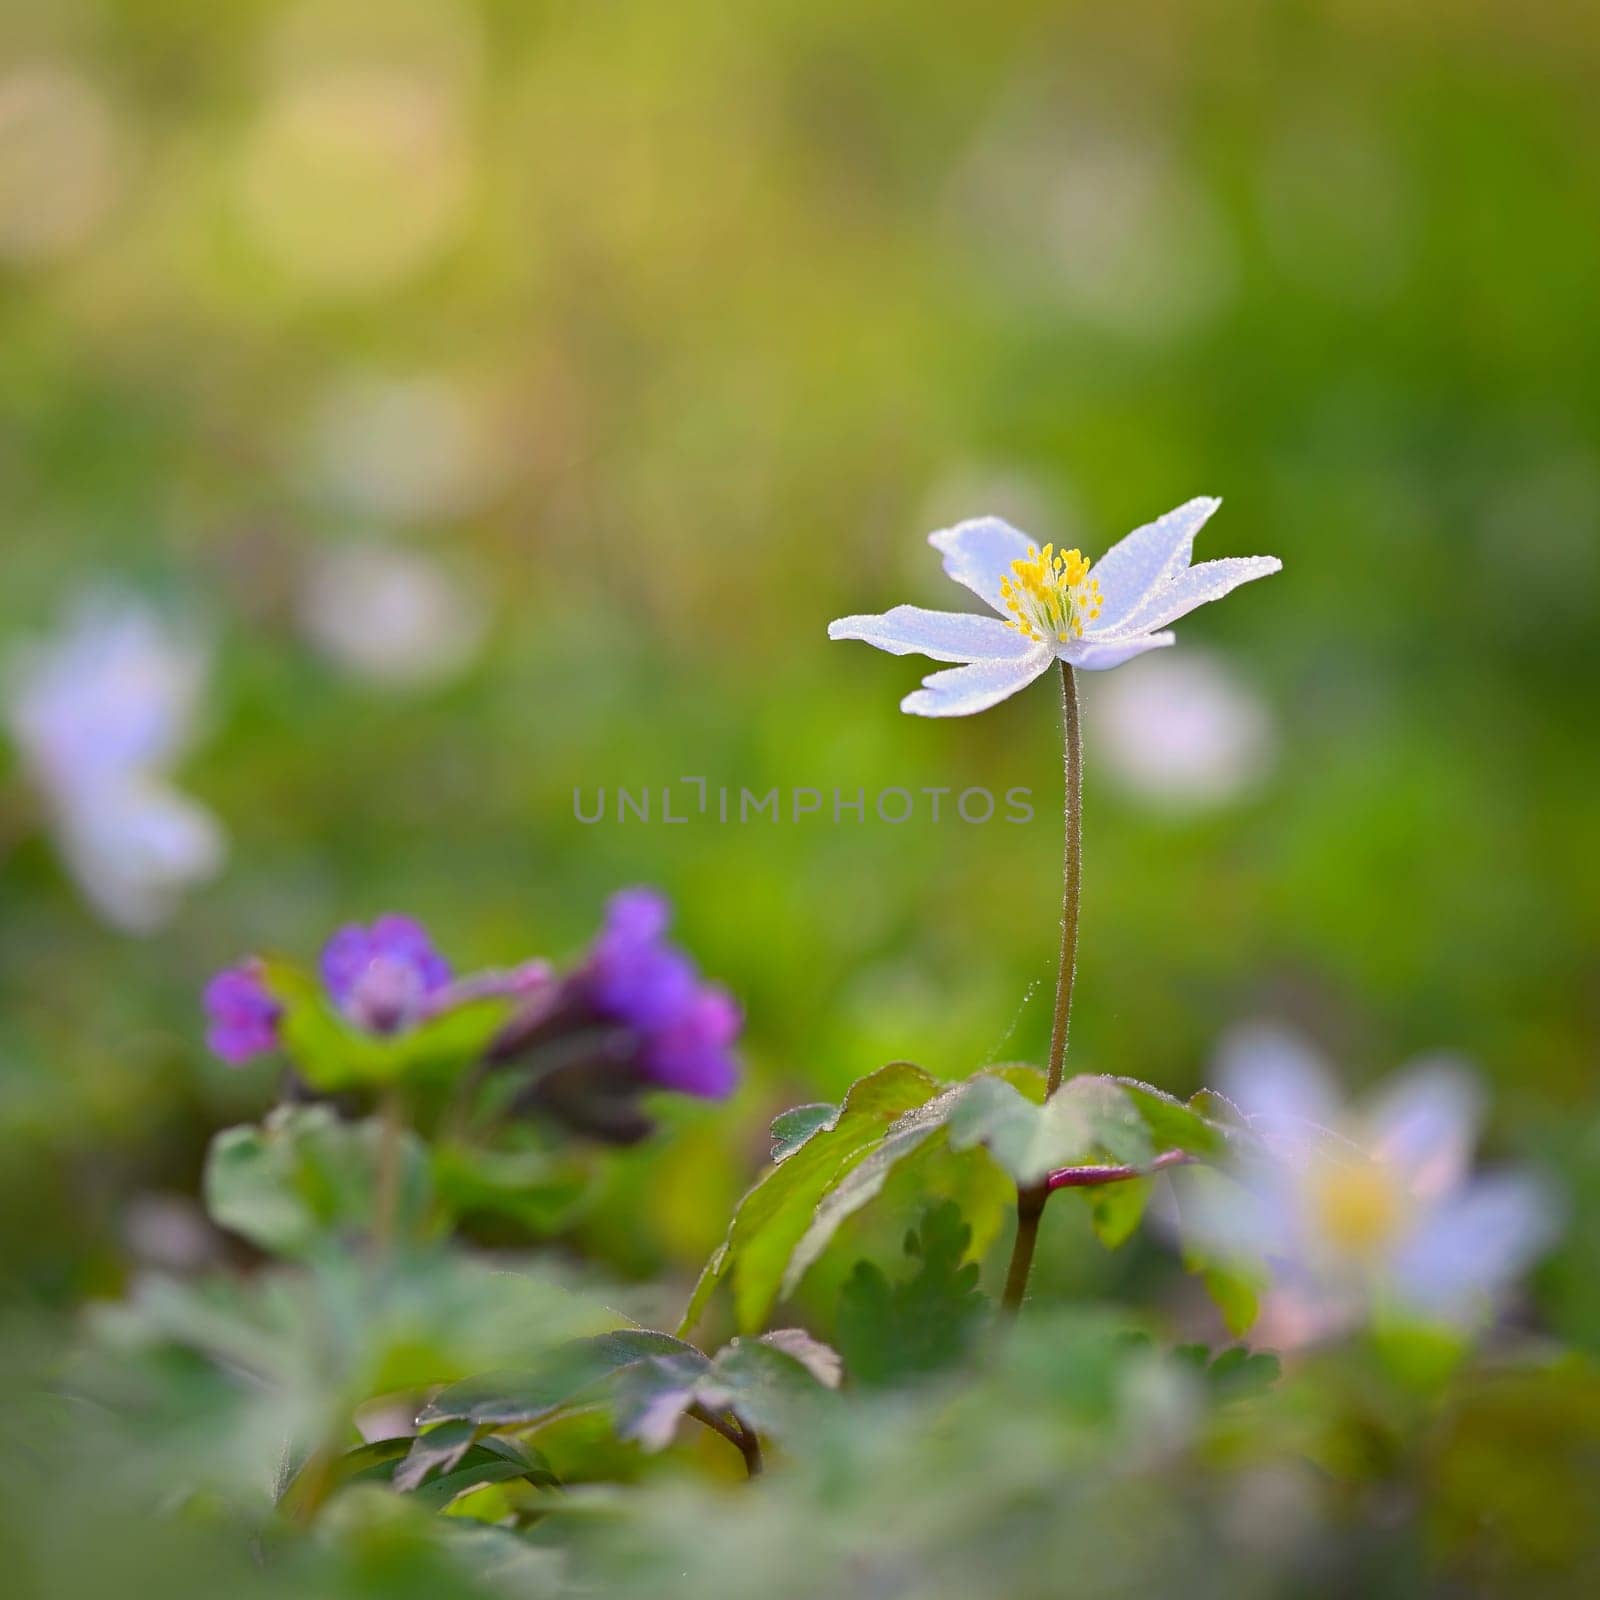 Spring white flowers in the grass Anemone (Isopyrum thalictroides) by Montypeter